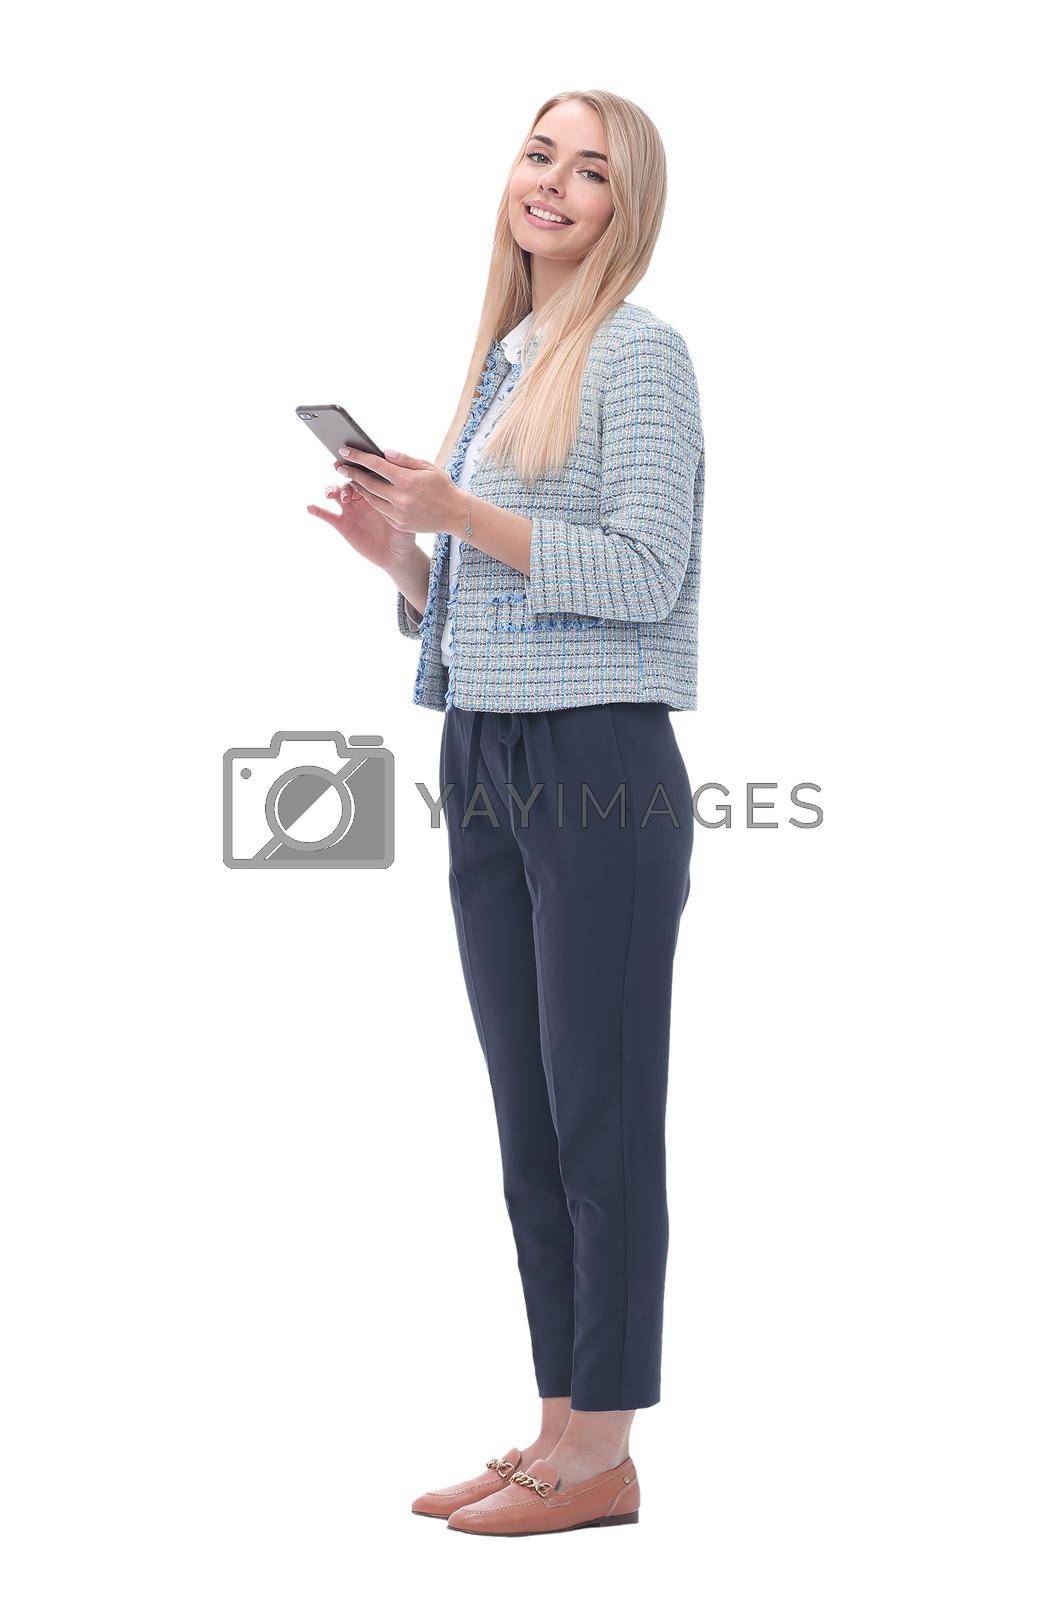 Royalty free image of smiling business woman reading e-mail on her smartphone. isolated on white by asdf